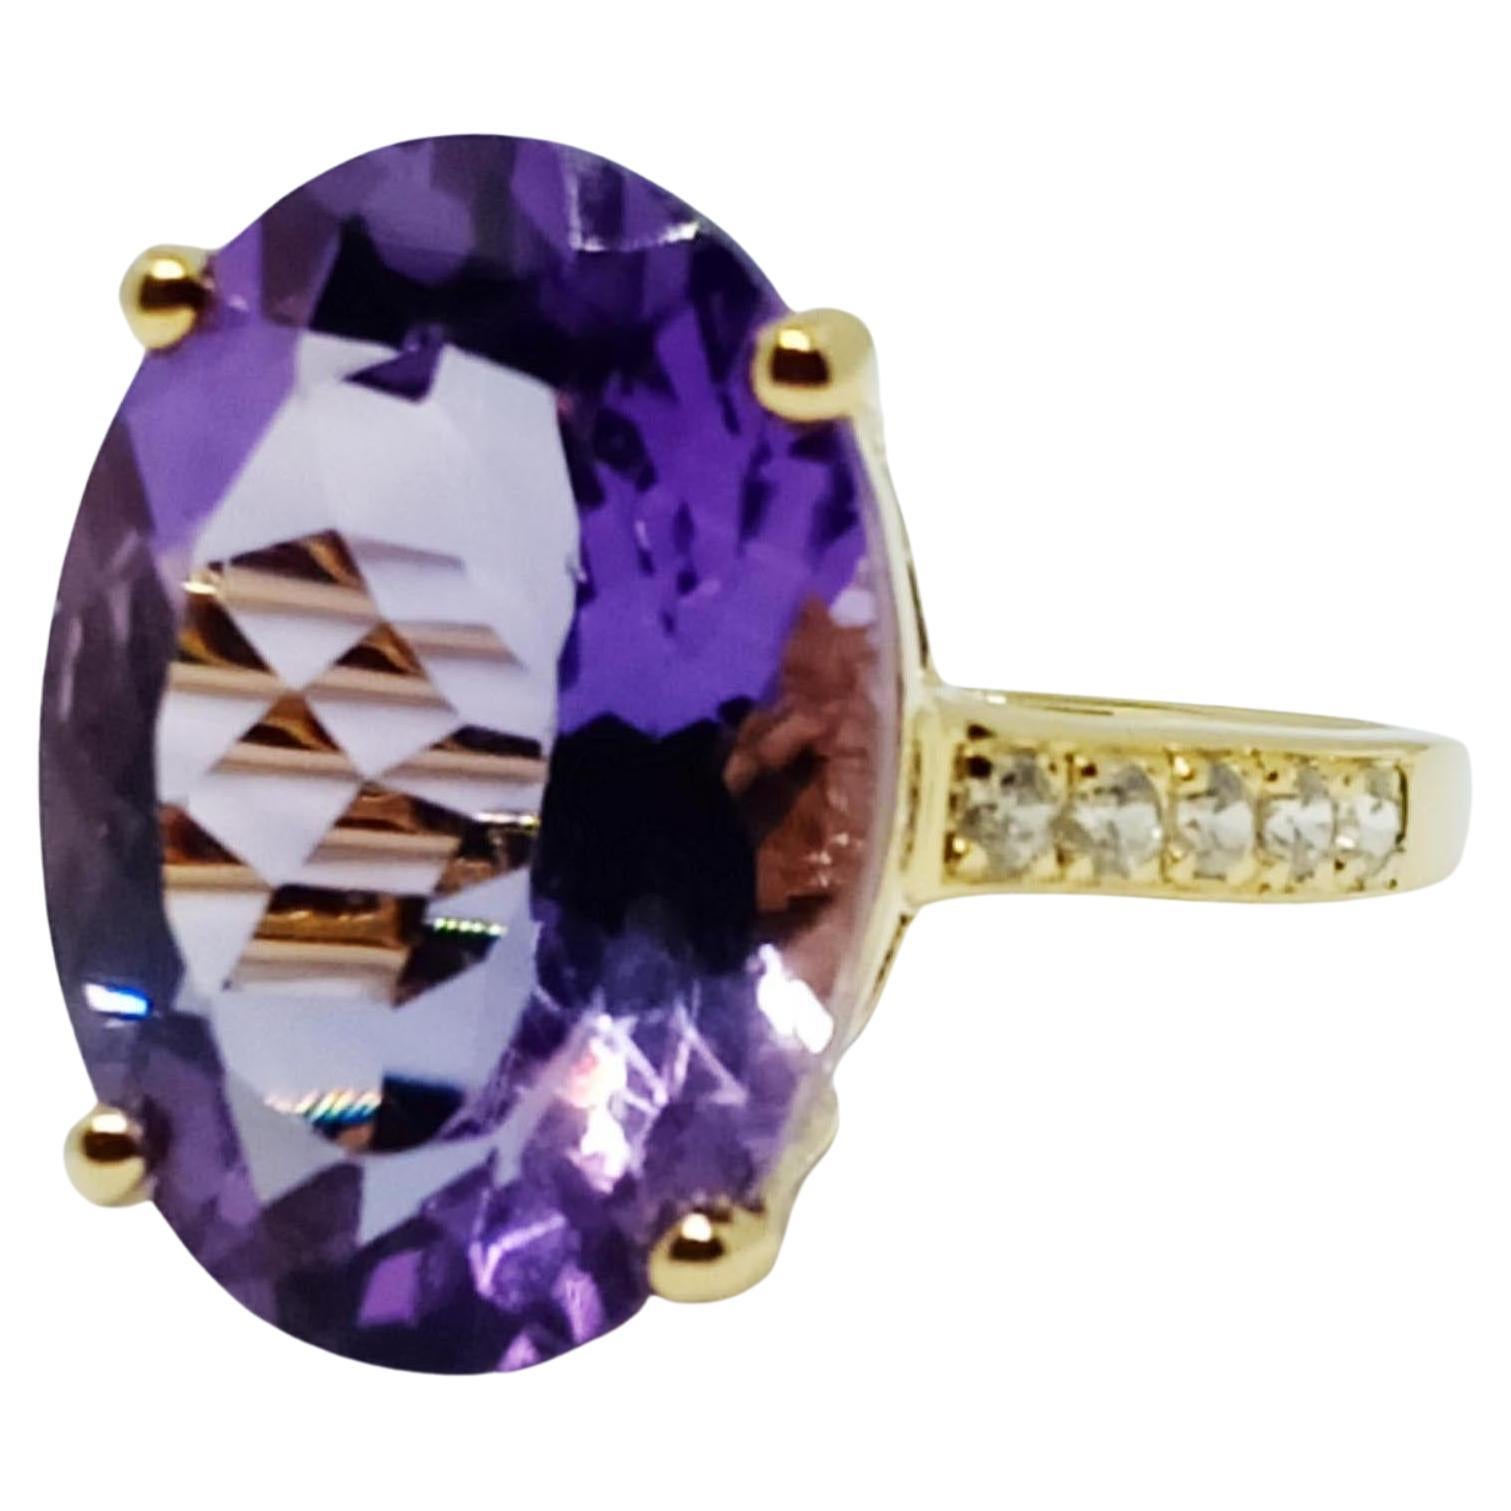 Amethyst ring ( 11.24cts )  white zircon 18kGold plated over sterling silver